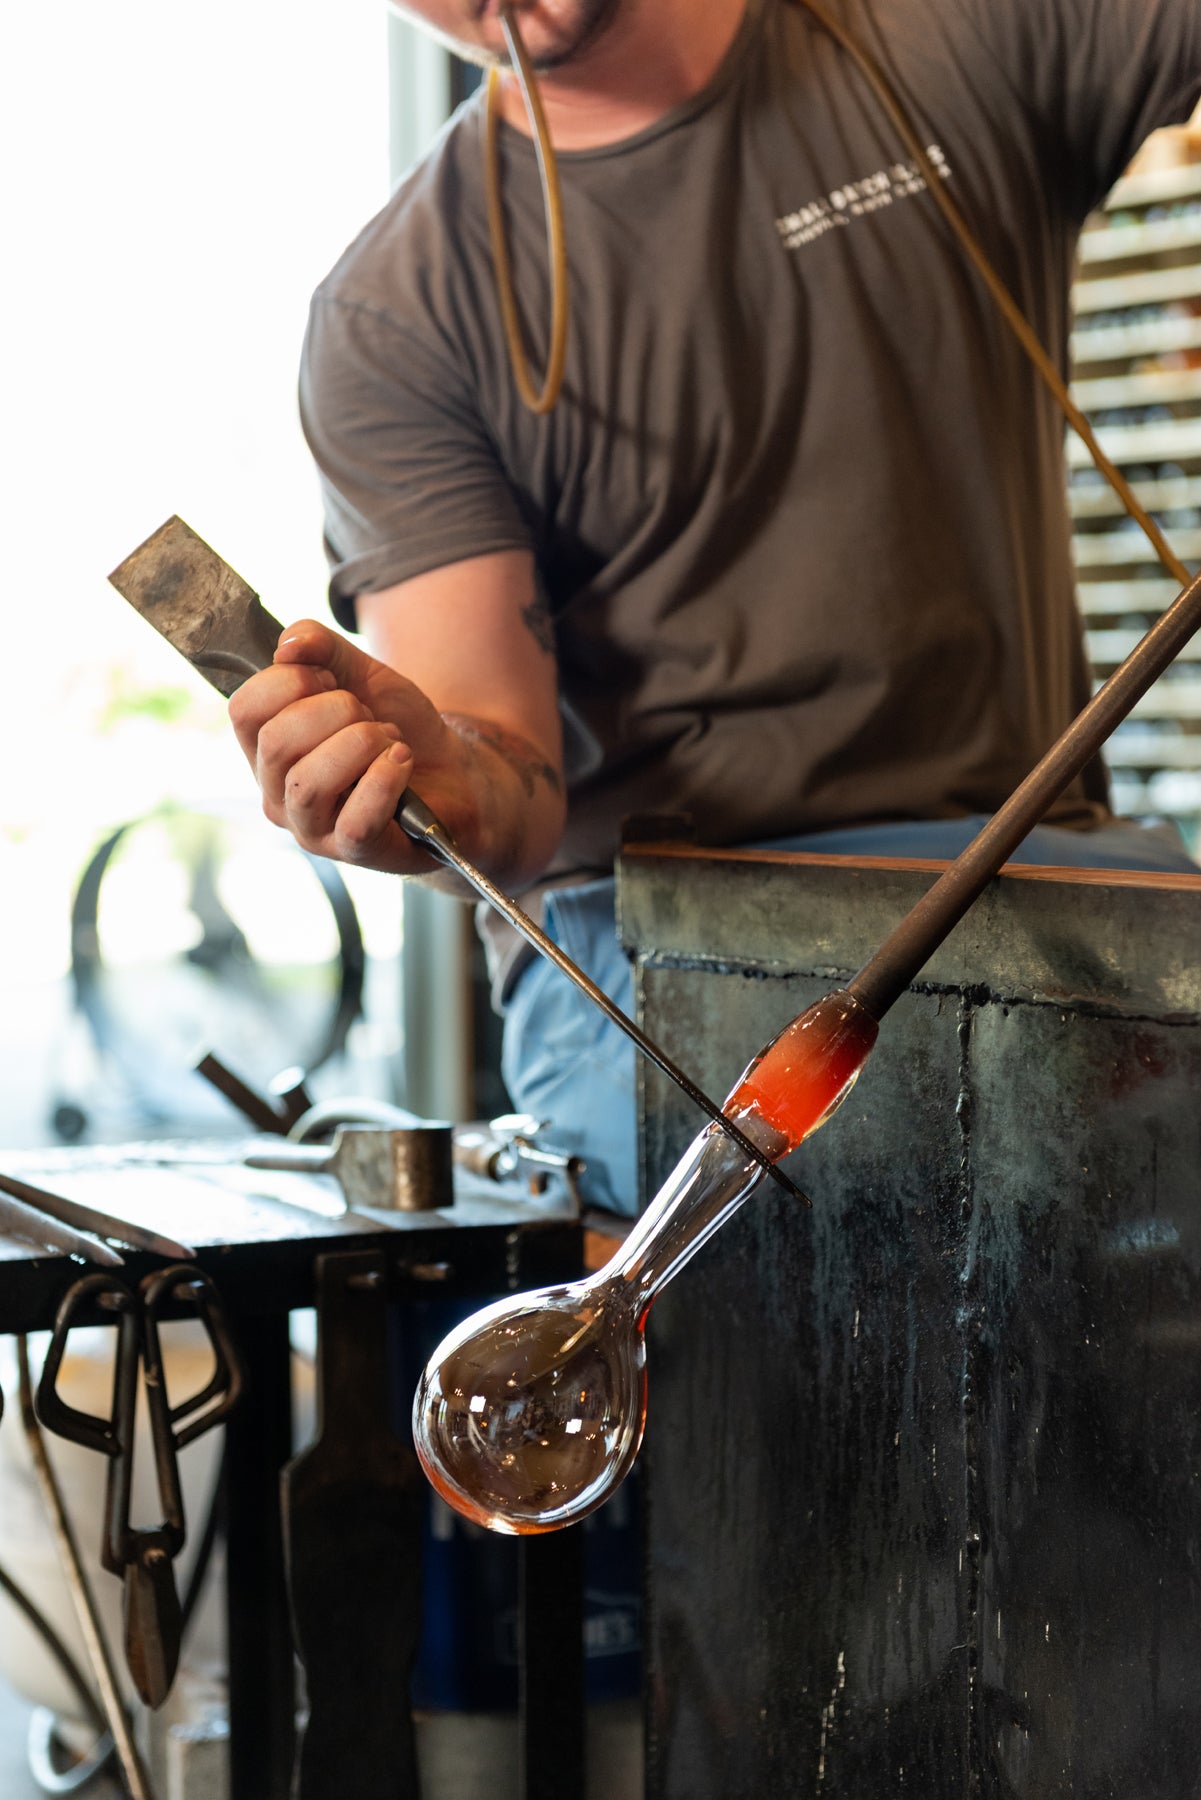 Asher Holman tooling a piece of hot glass that is held at an angle in the Small Batch Glass hotshop. Image by Loam